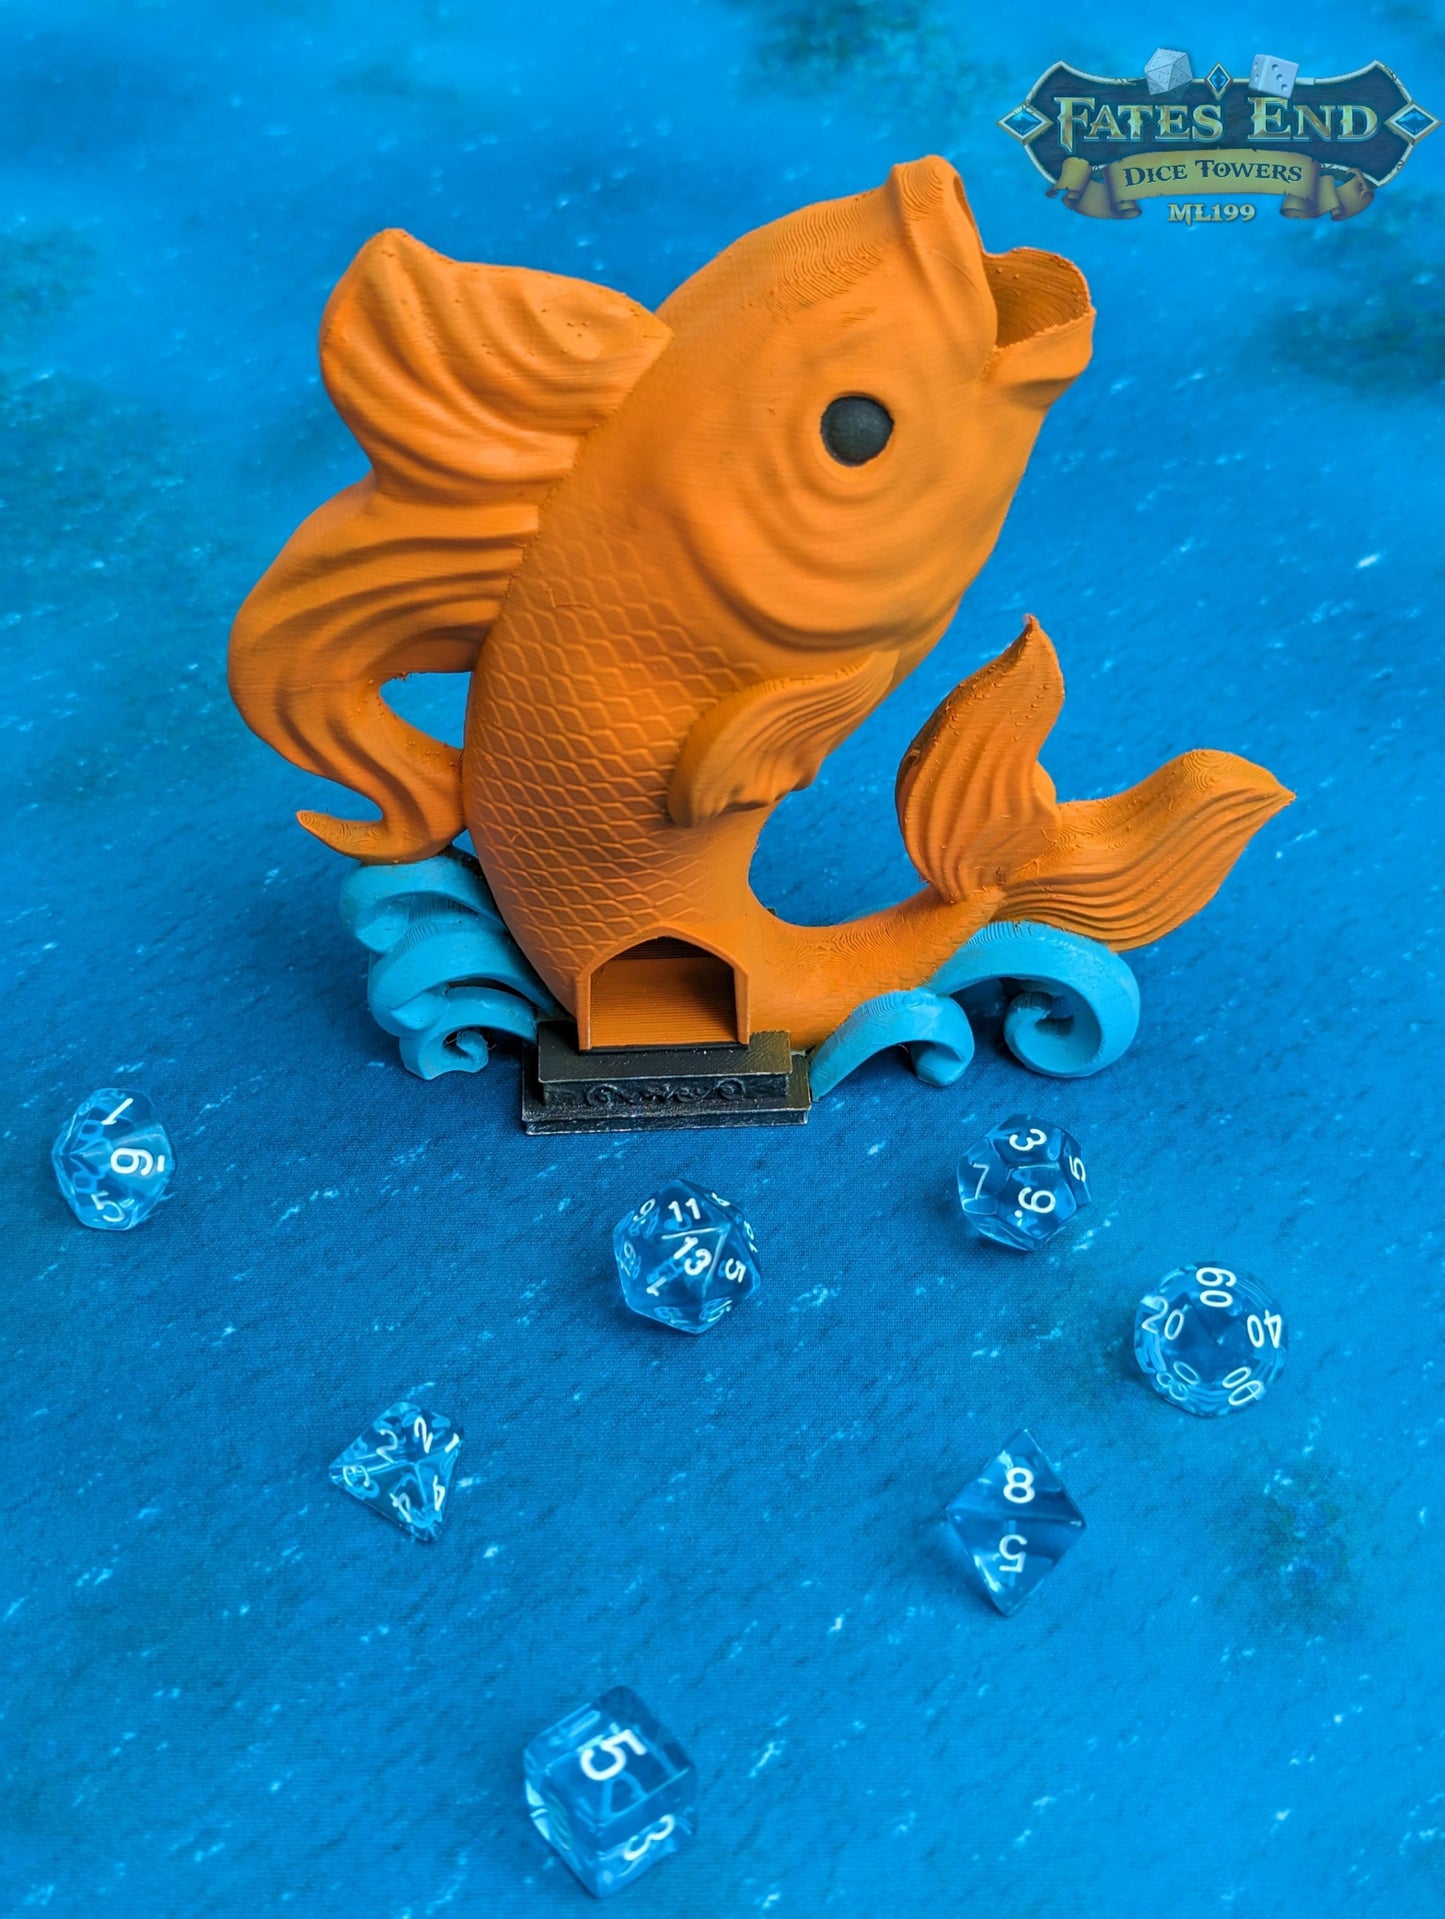 Koi Fish Dice Tower-Fate's End